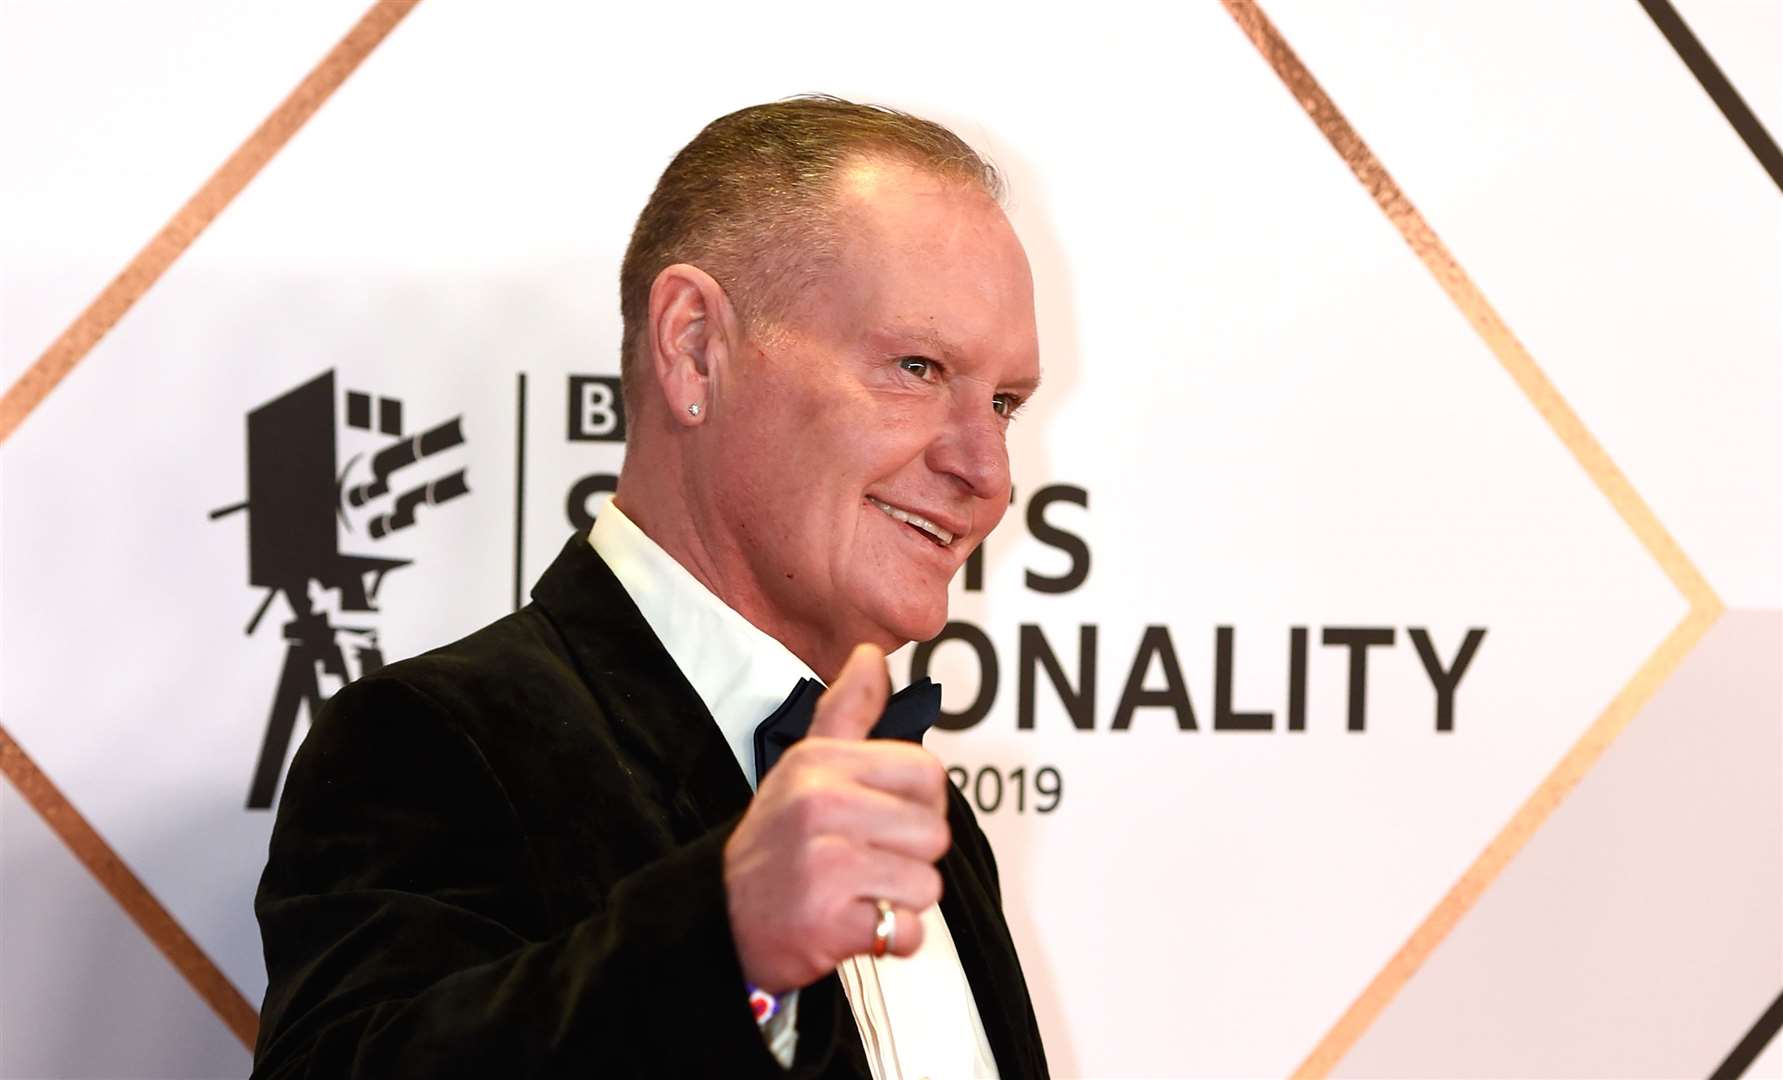 A documentary about Paul Gascoigne called Gazza also drew phone calls for support